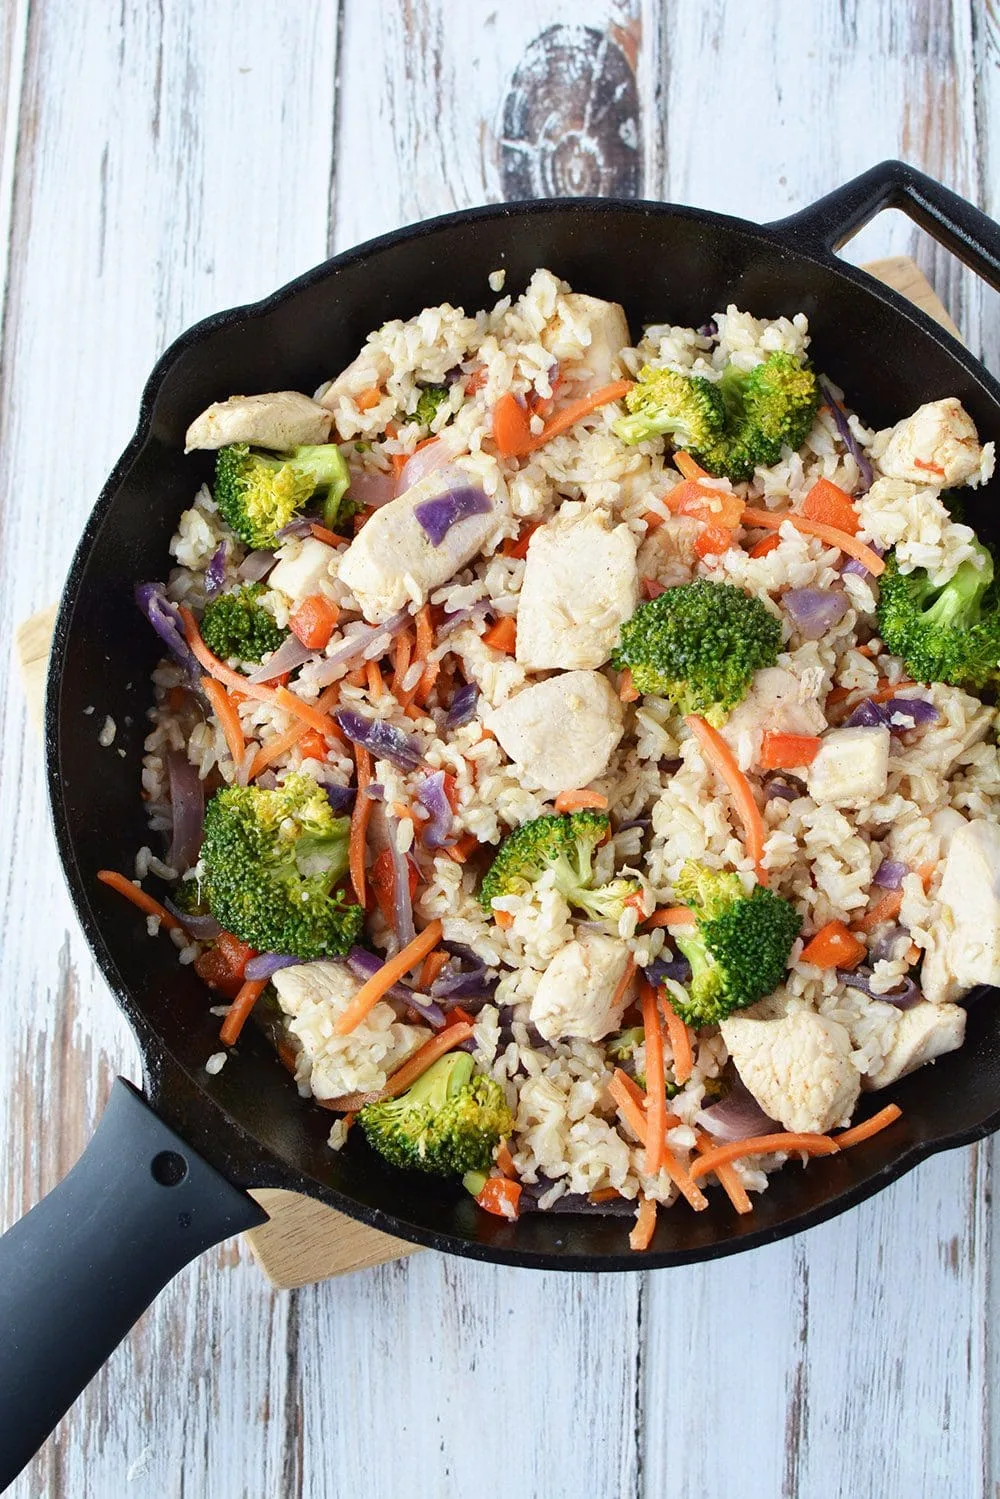 Skillet chicken with ginger, veggies, and rice.